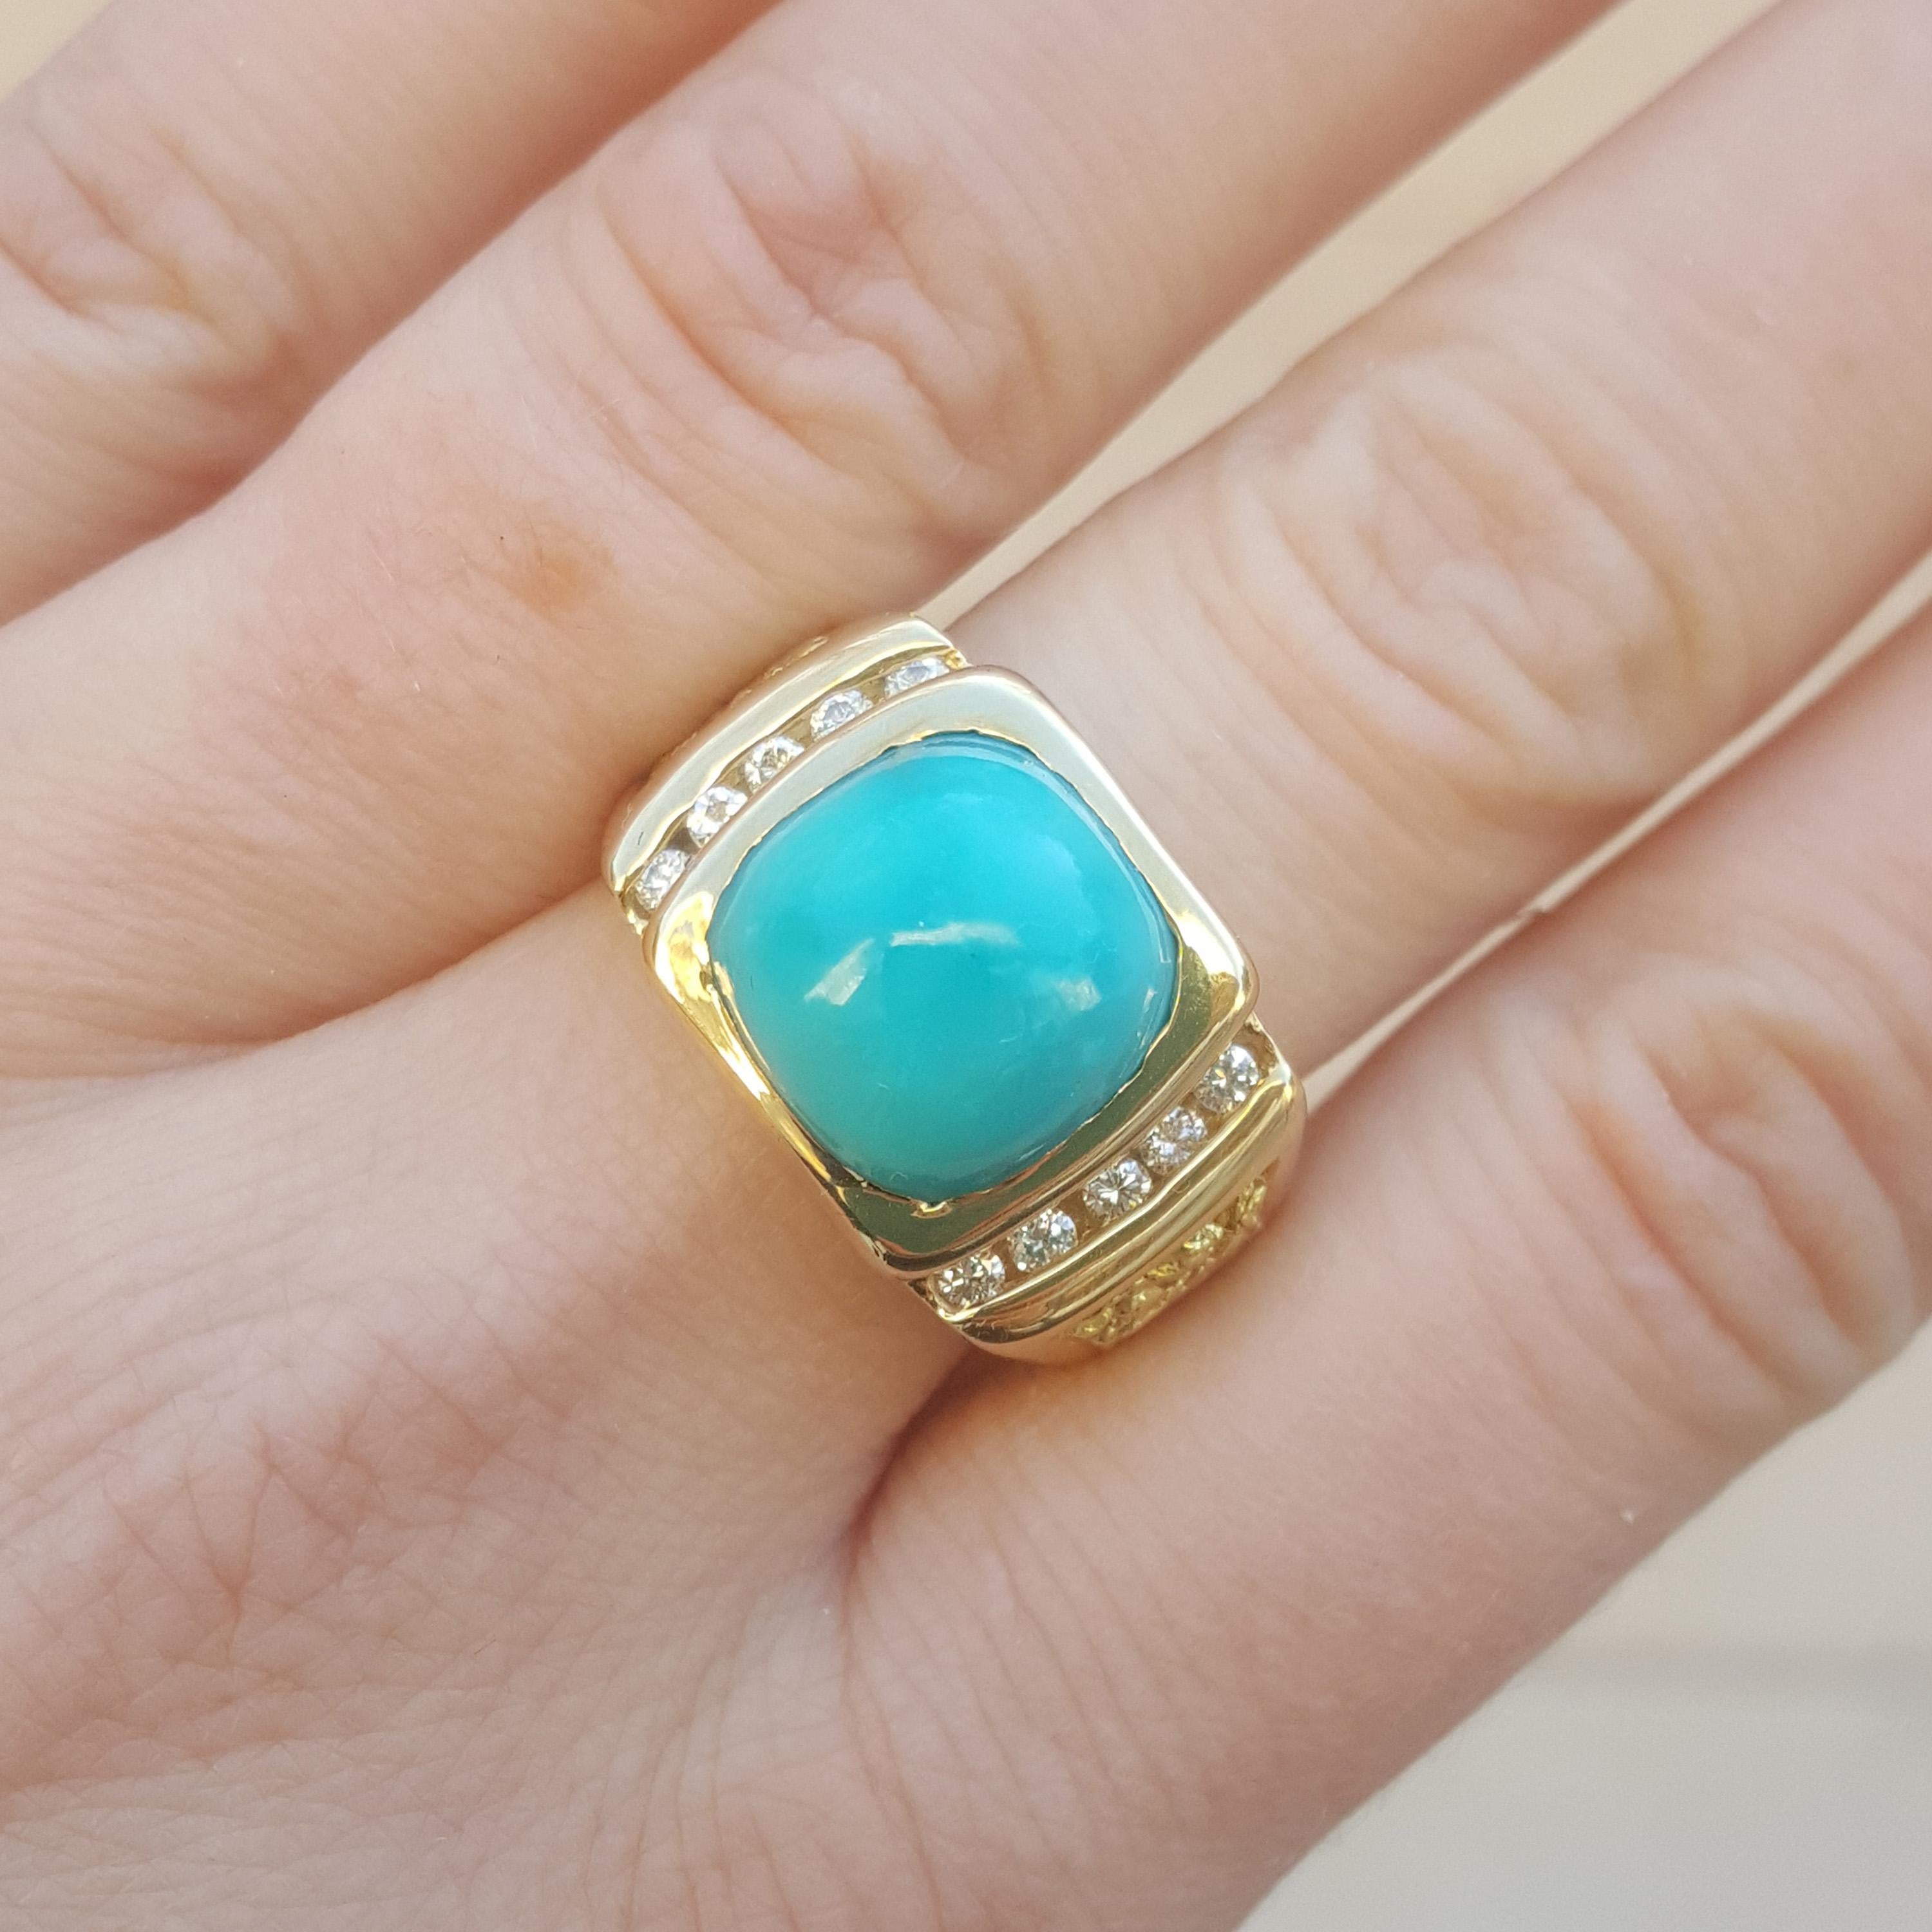 This bright robin’s egg blue of Kingman Mine turquoise is completely natural and looks gorgeous with the rich 18kt gold color.

The classic style of this men's ring is a perfect complement to the vivid and distinctive materials used.

-Kingman Mine